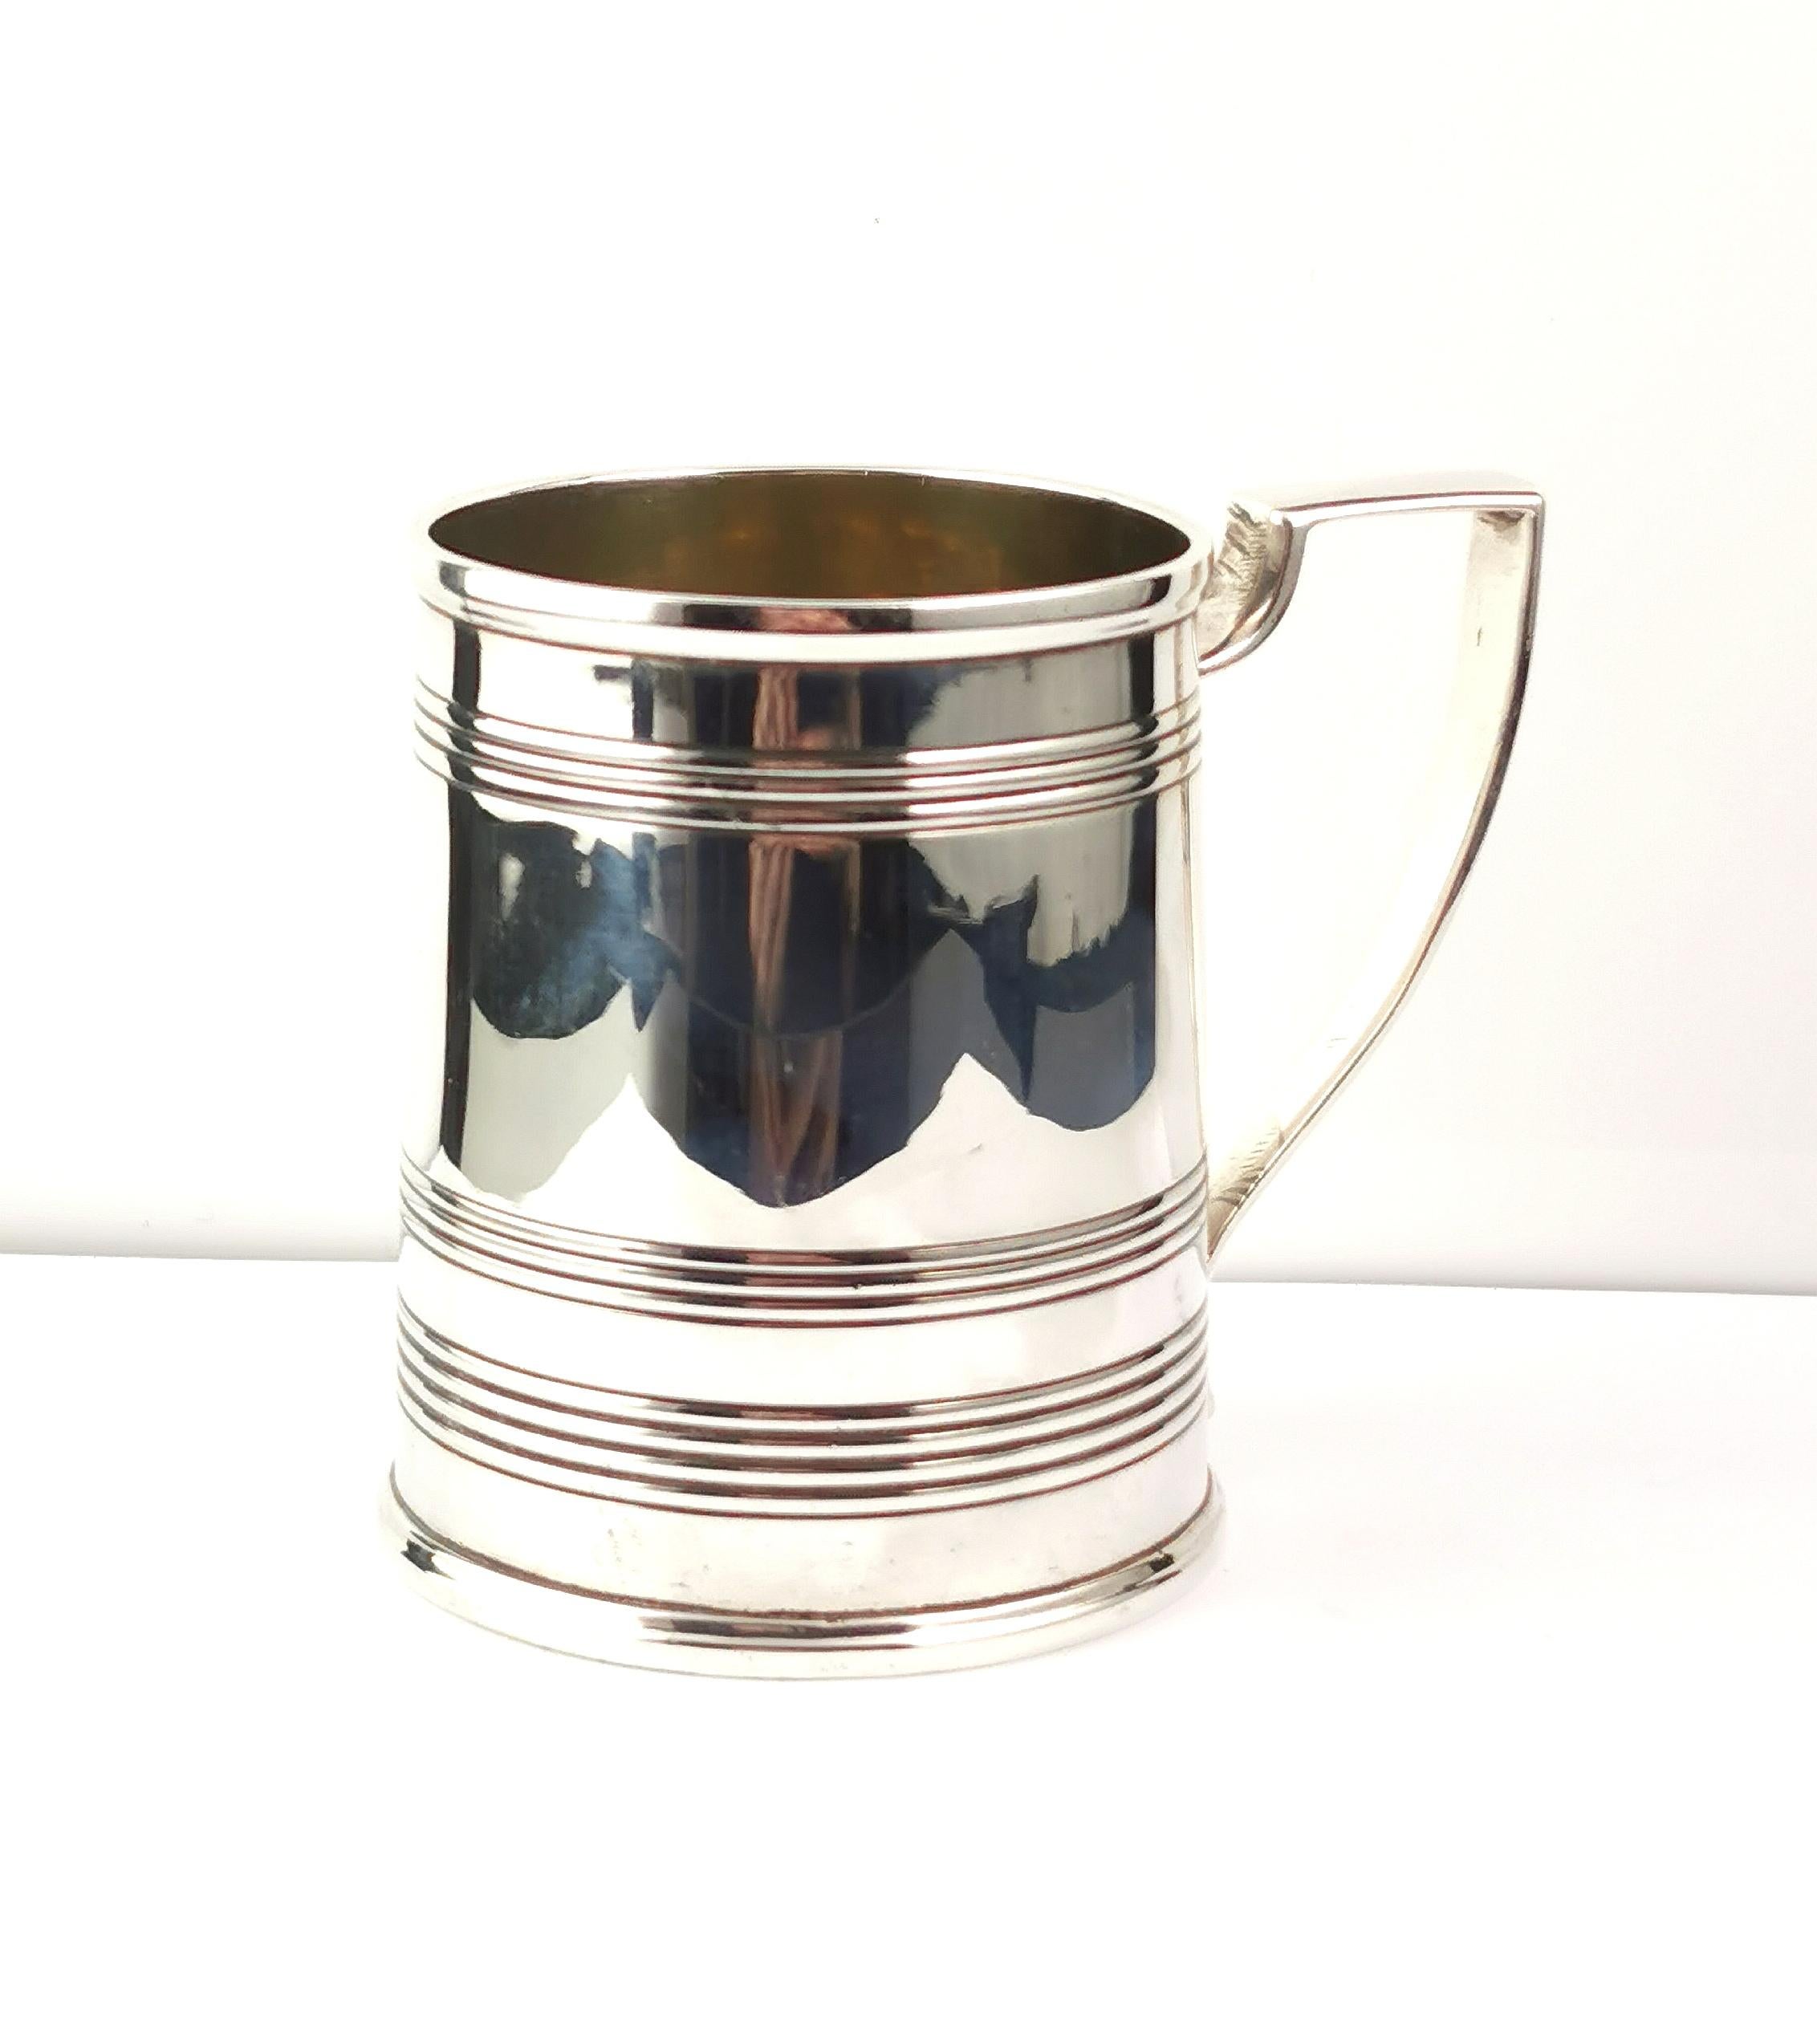 A delightful antique Georgian era sterling silver mug or tankard.

It has an engraved design to the upper half and lower half with a smooth finish on the mid section.

It has a squared scrolling handle, a half pint mug, it still has a lovely gilt